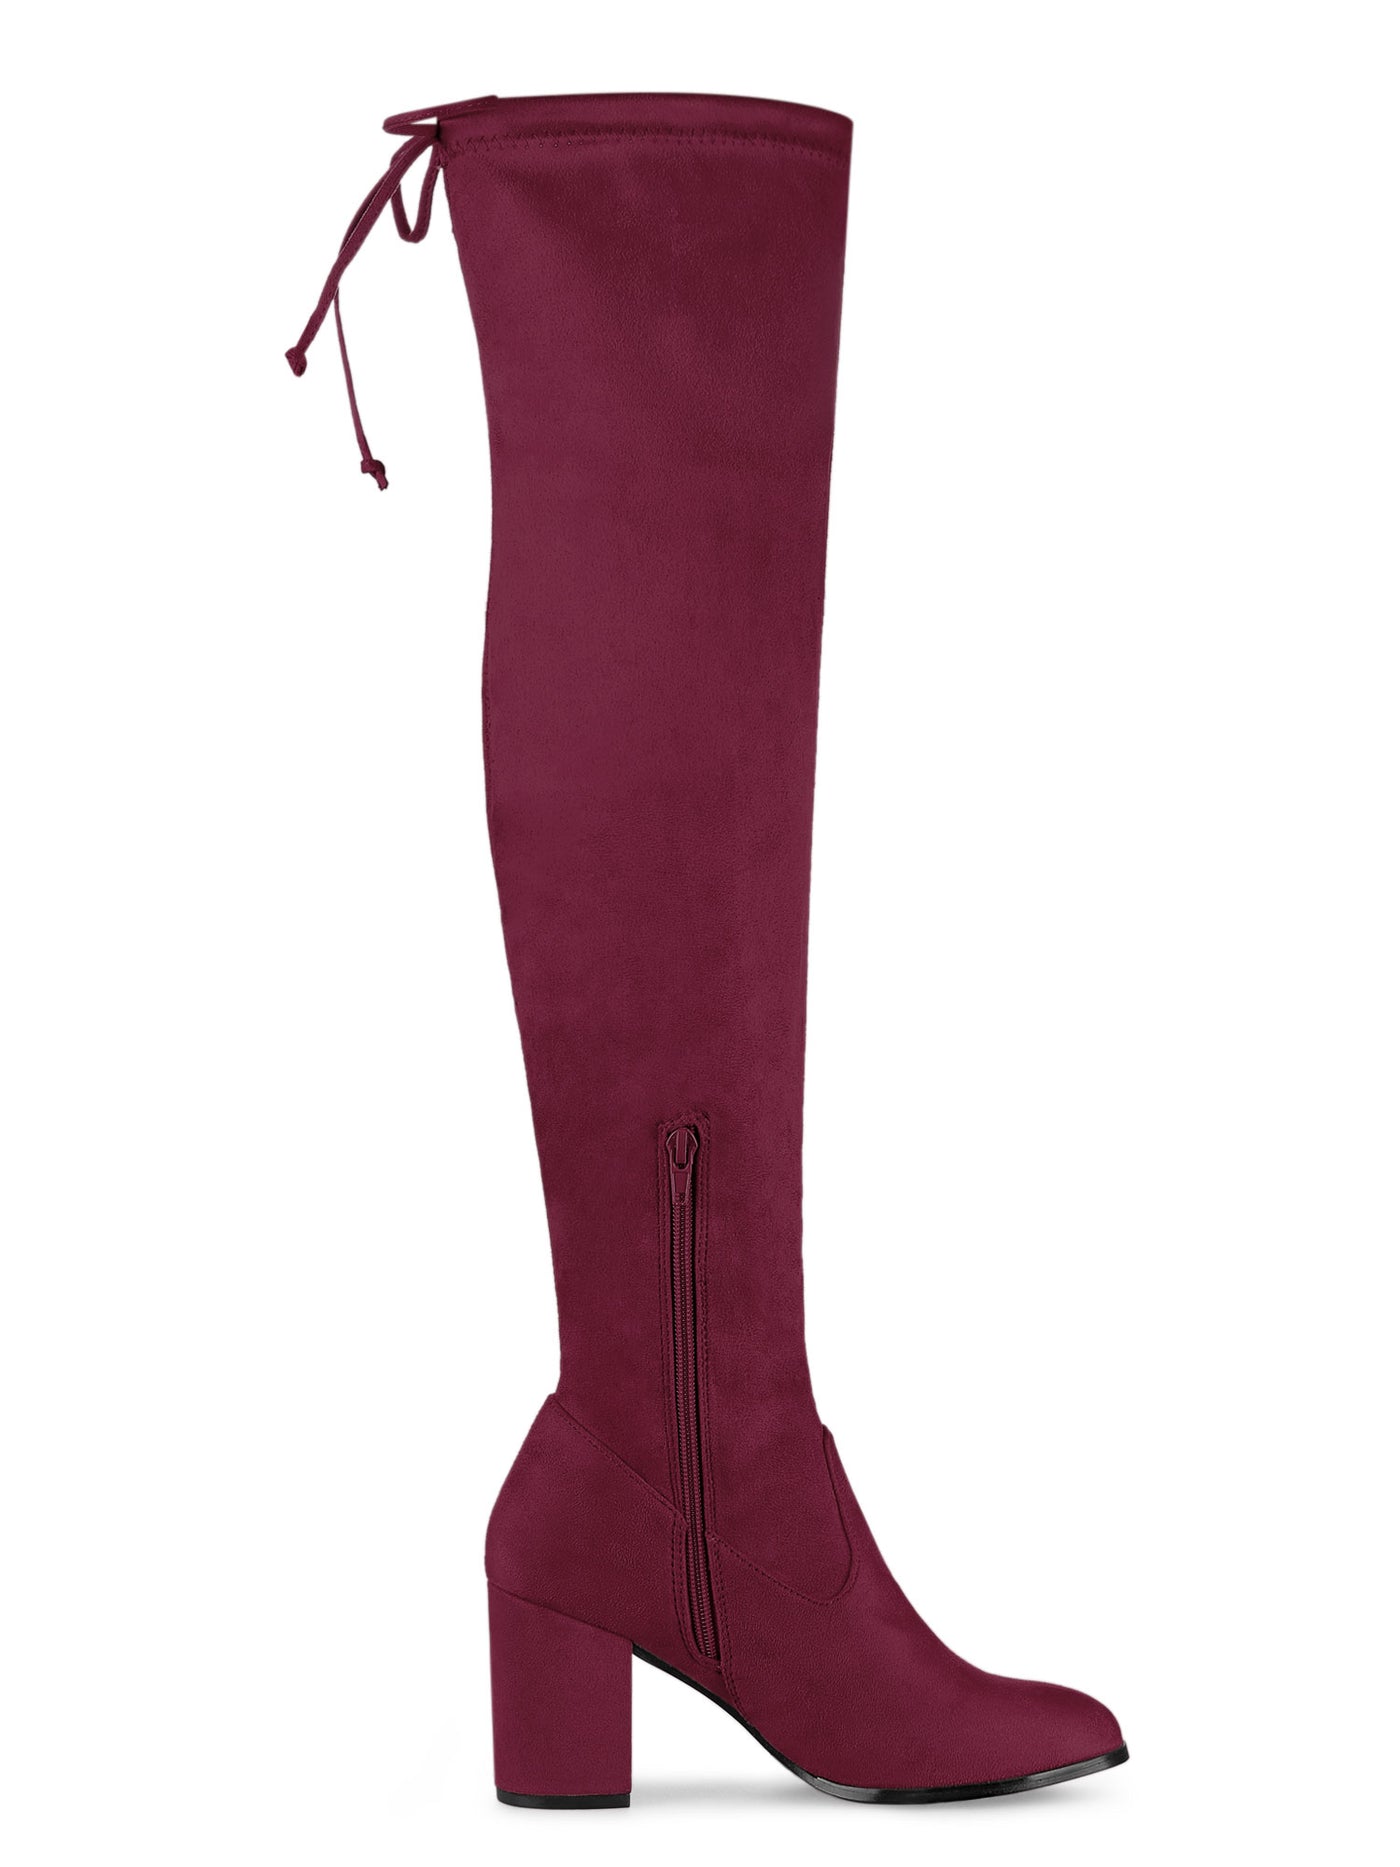 Allegra K Round Toe Chunky Heel Over the Knee High Boots